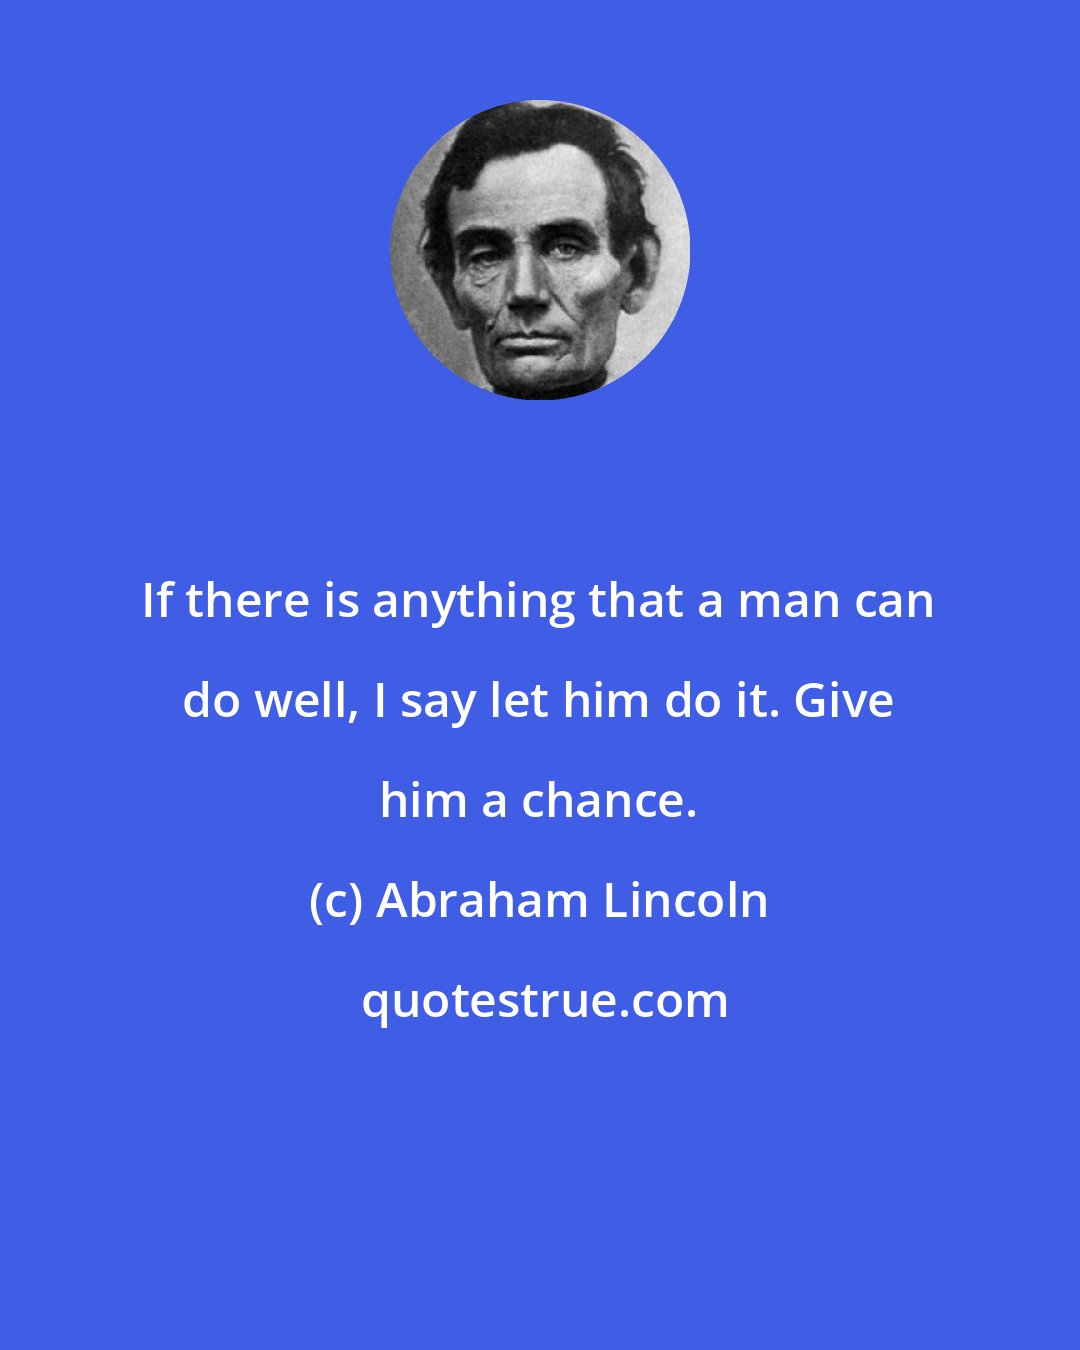 Abraham Lincoln: If there is anything that a man can do well, I say let him do it. Give him a chance.